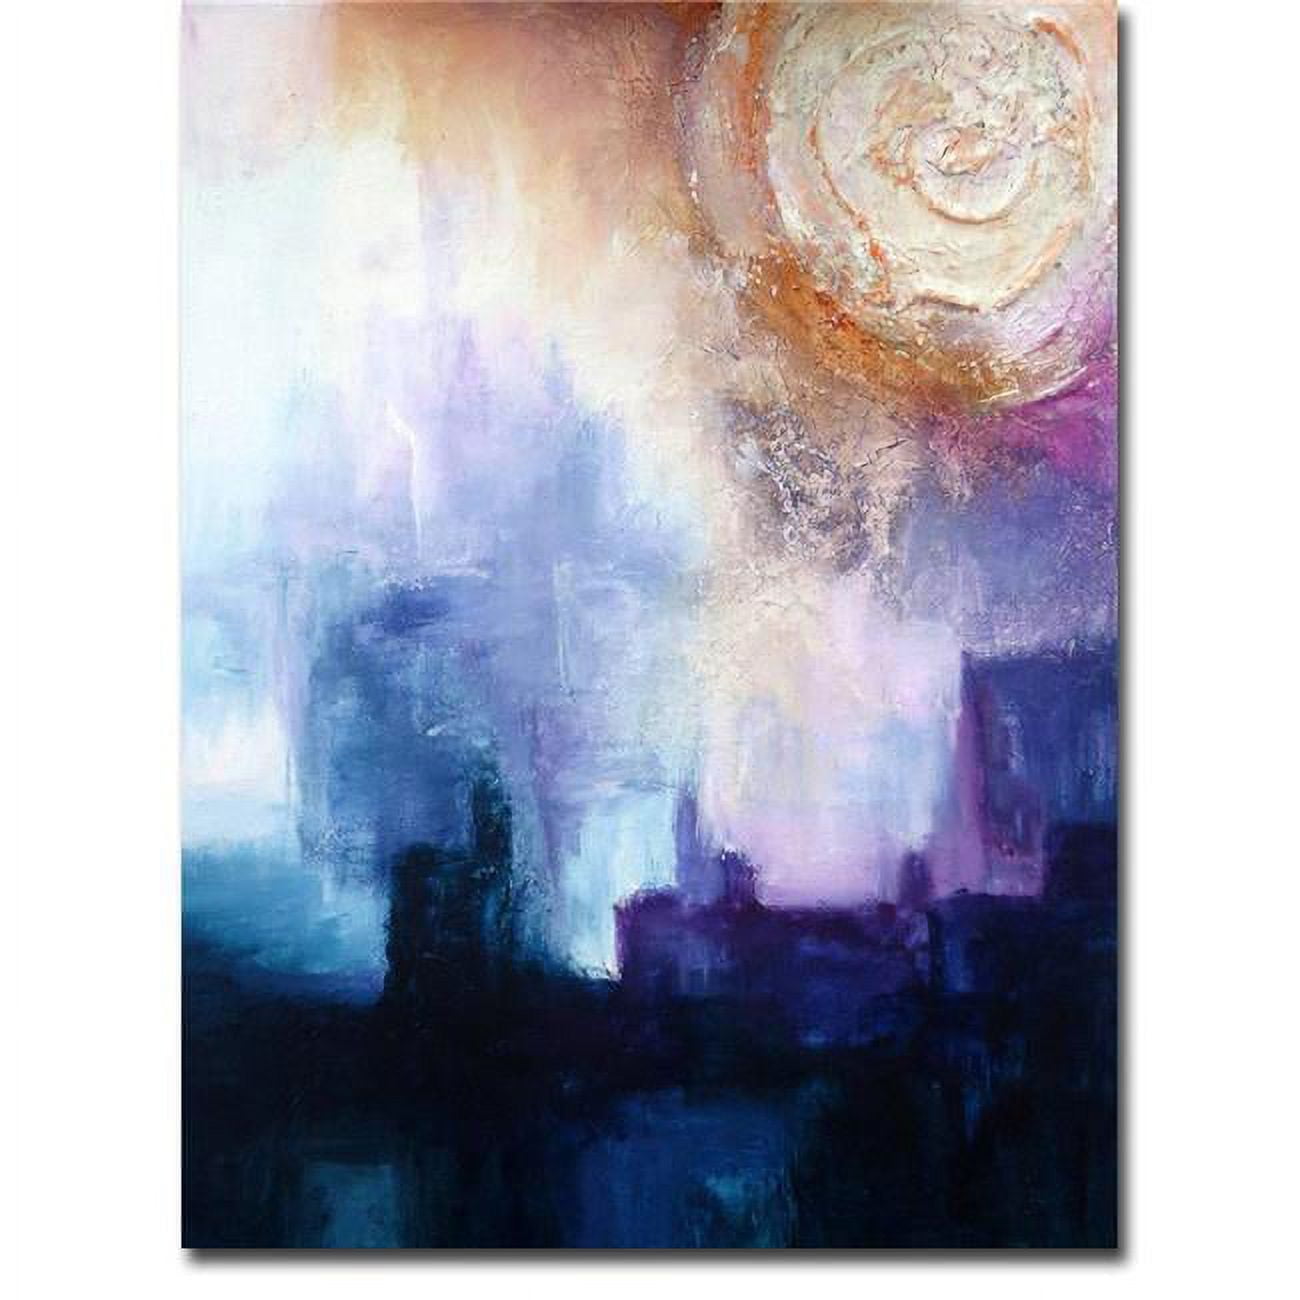 Dreams Found By Kimberly Abbott Premium Oversize Gallery-wrapped Canvas Giclee Art - Ready-to-hang, 40 X 30 In.